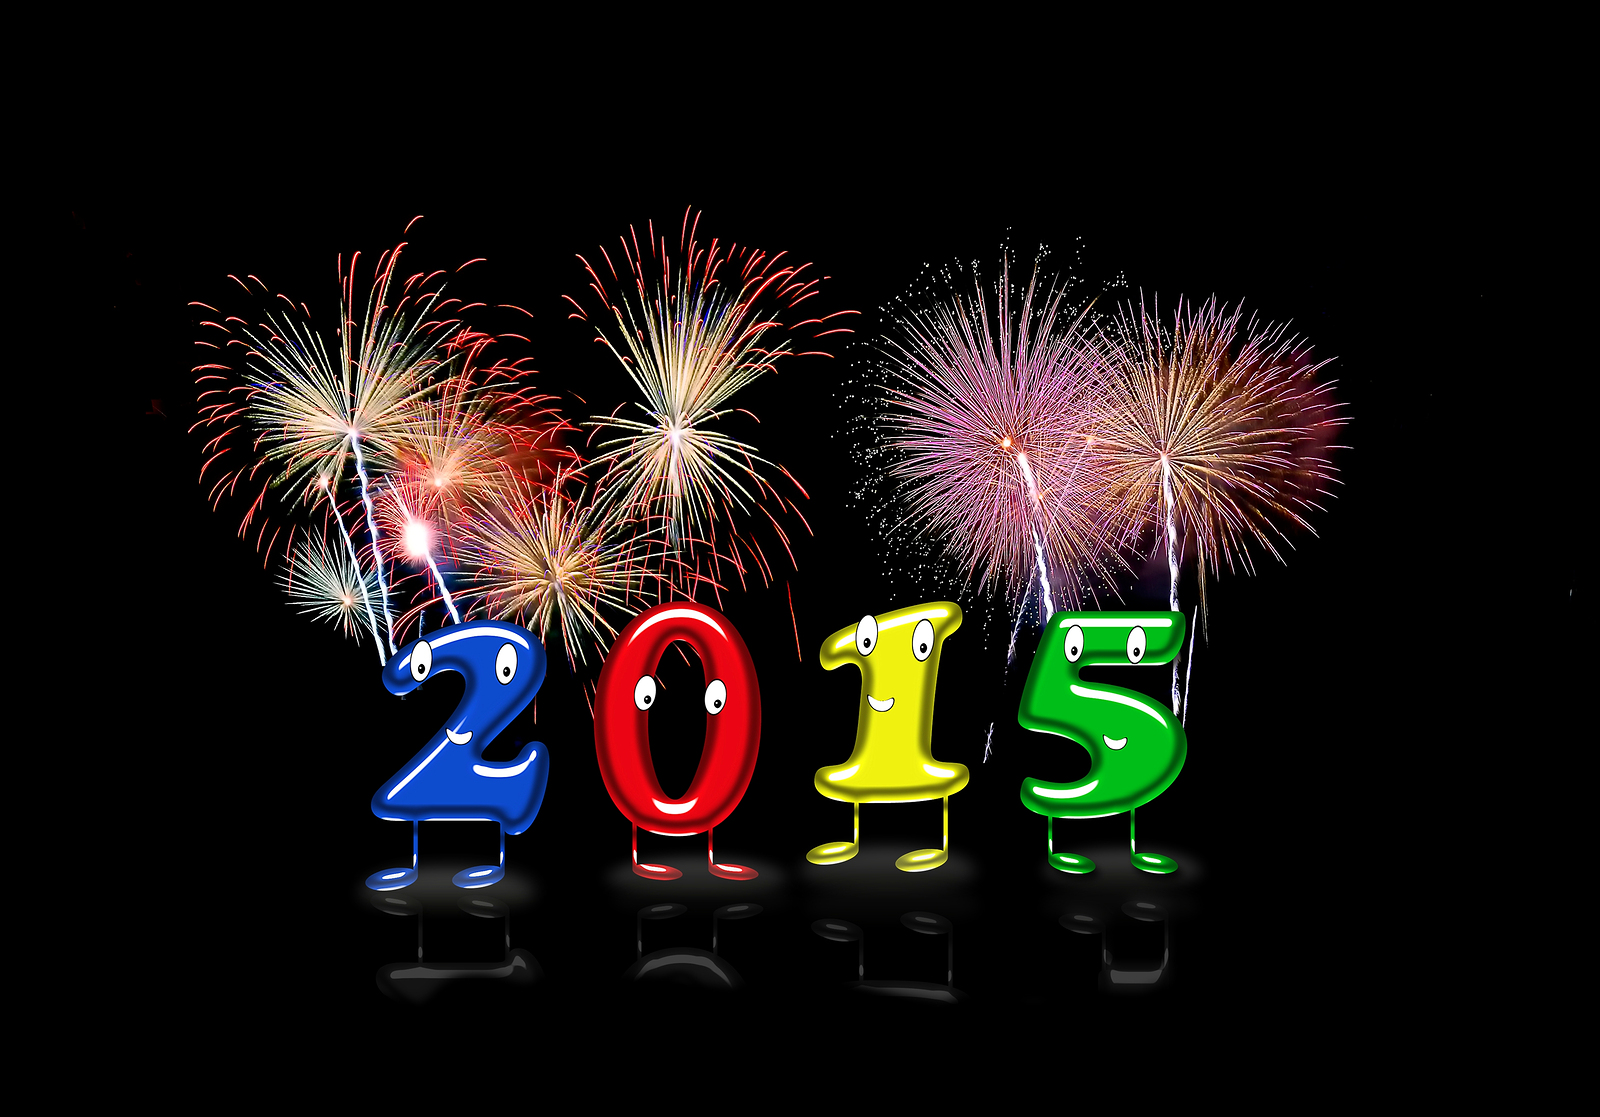 Fireworks New Year Holiday Celebration Party New Year 2015 1600x1117